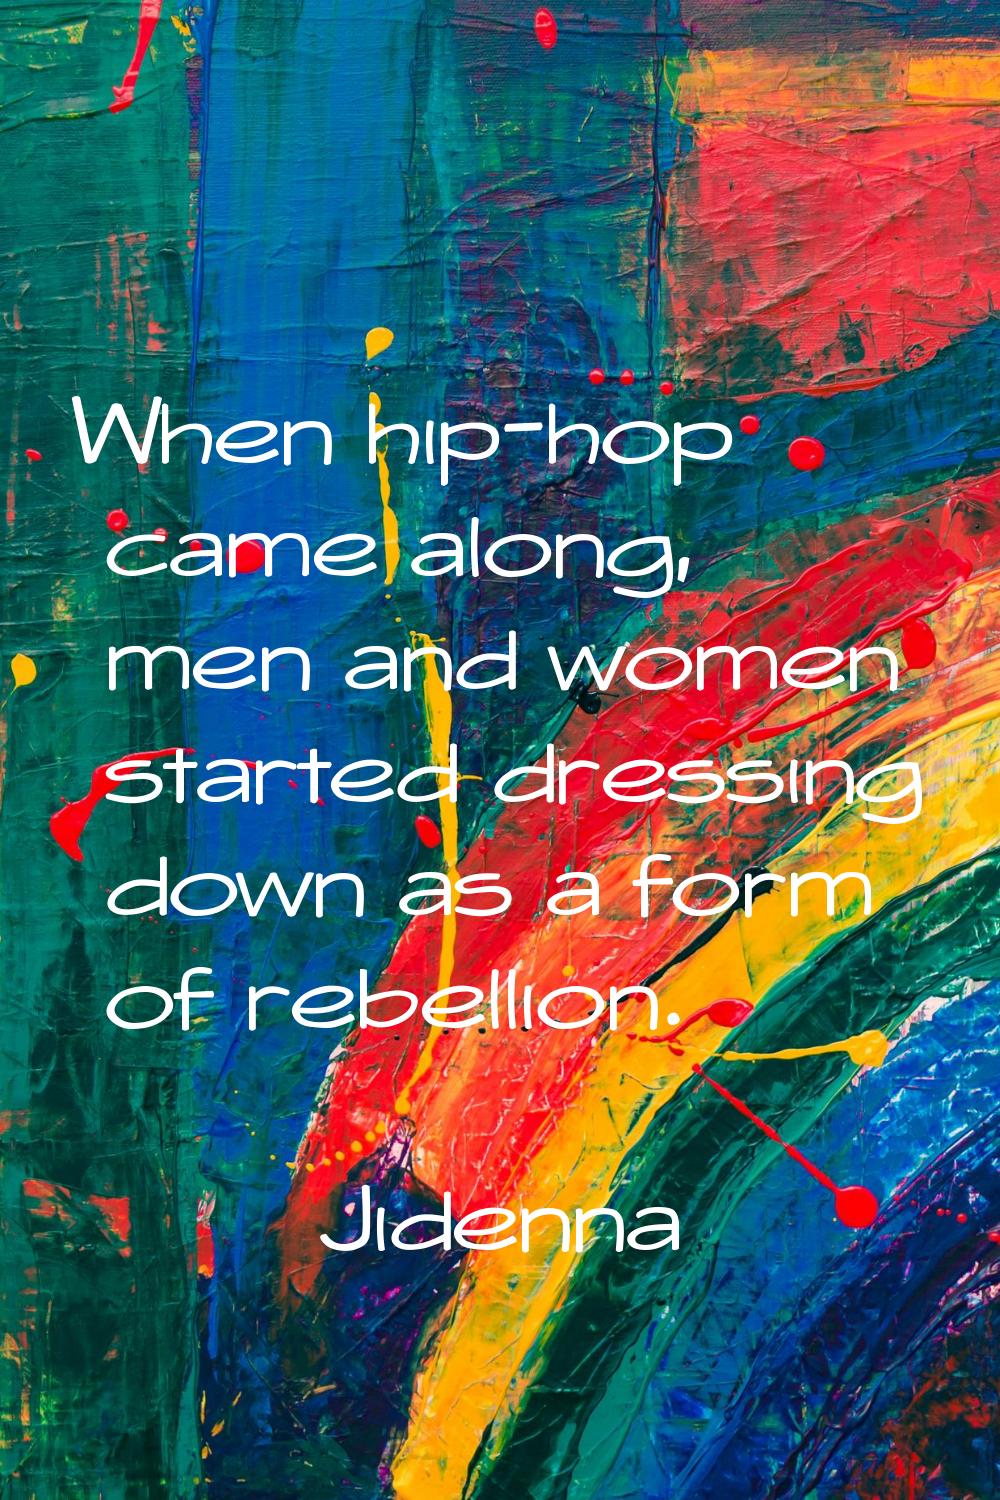 When hip-hop came along, men and women started dressing down as a form of rebellion.